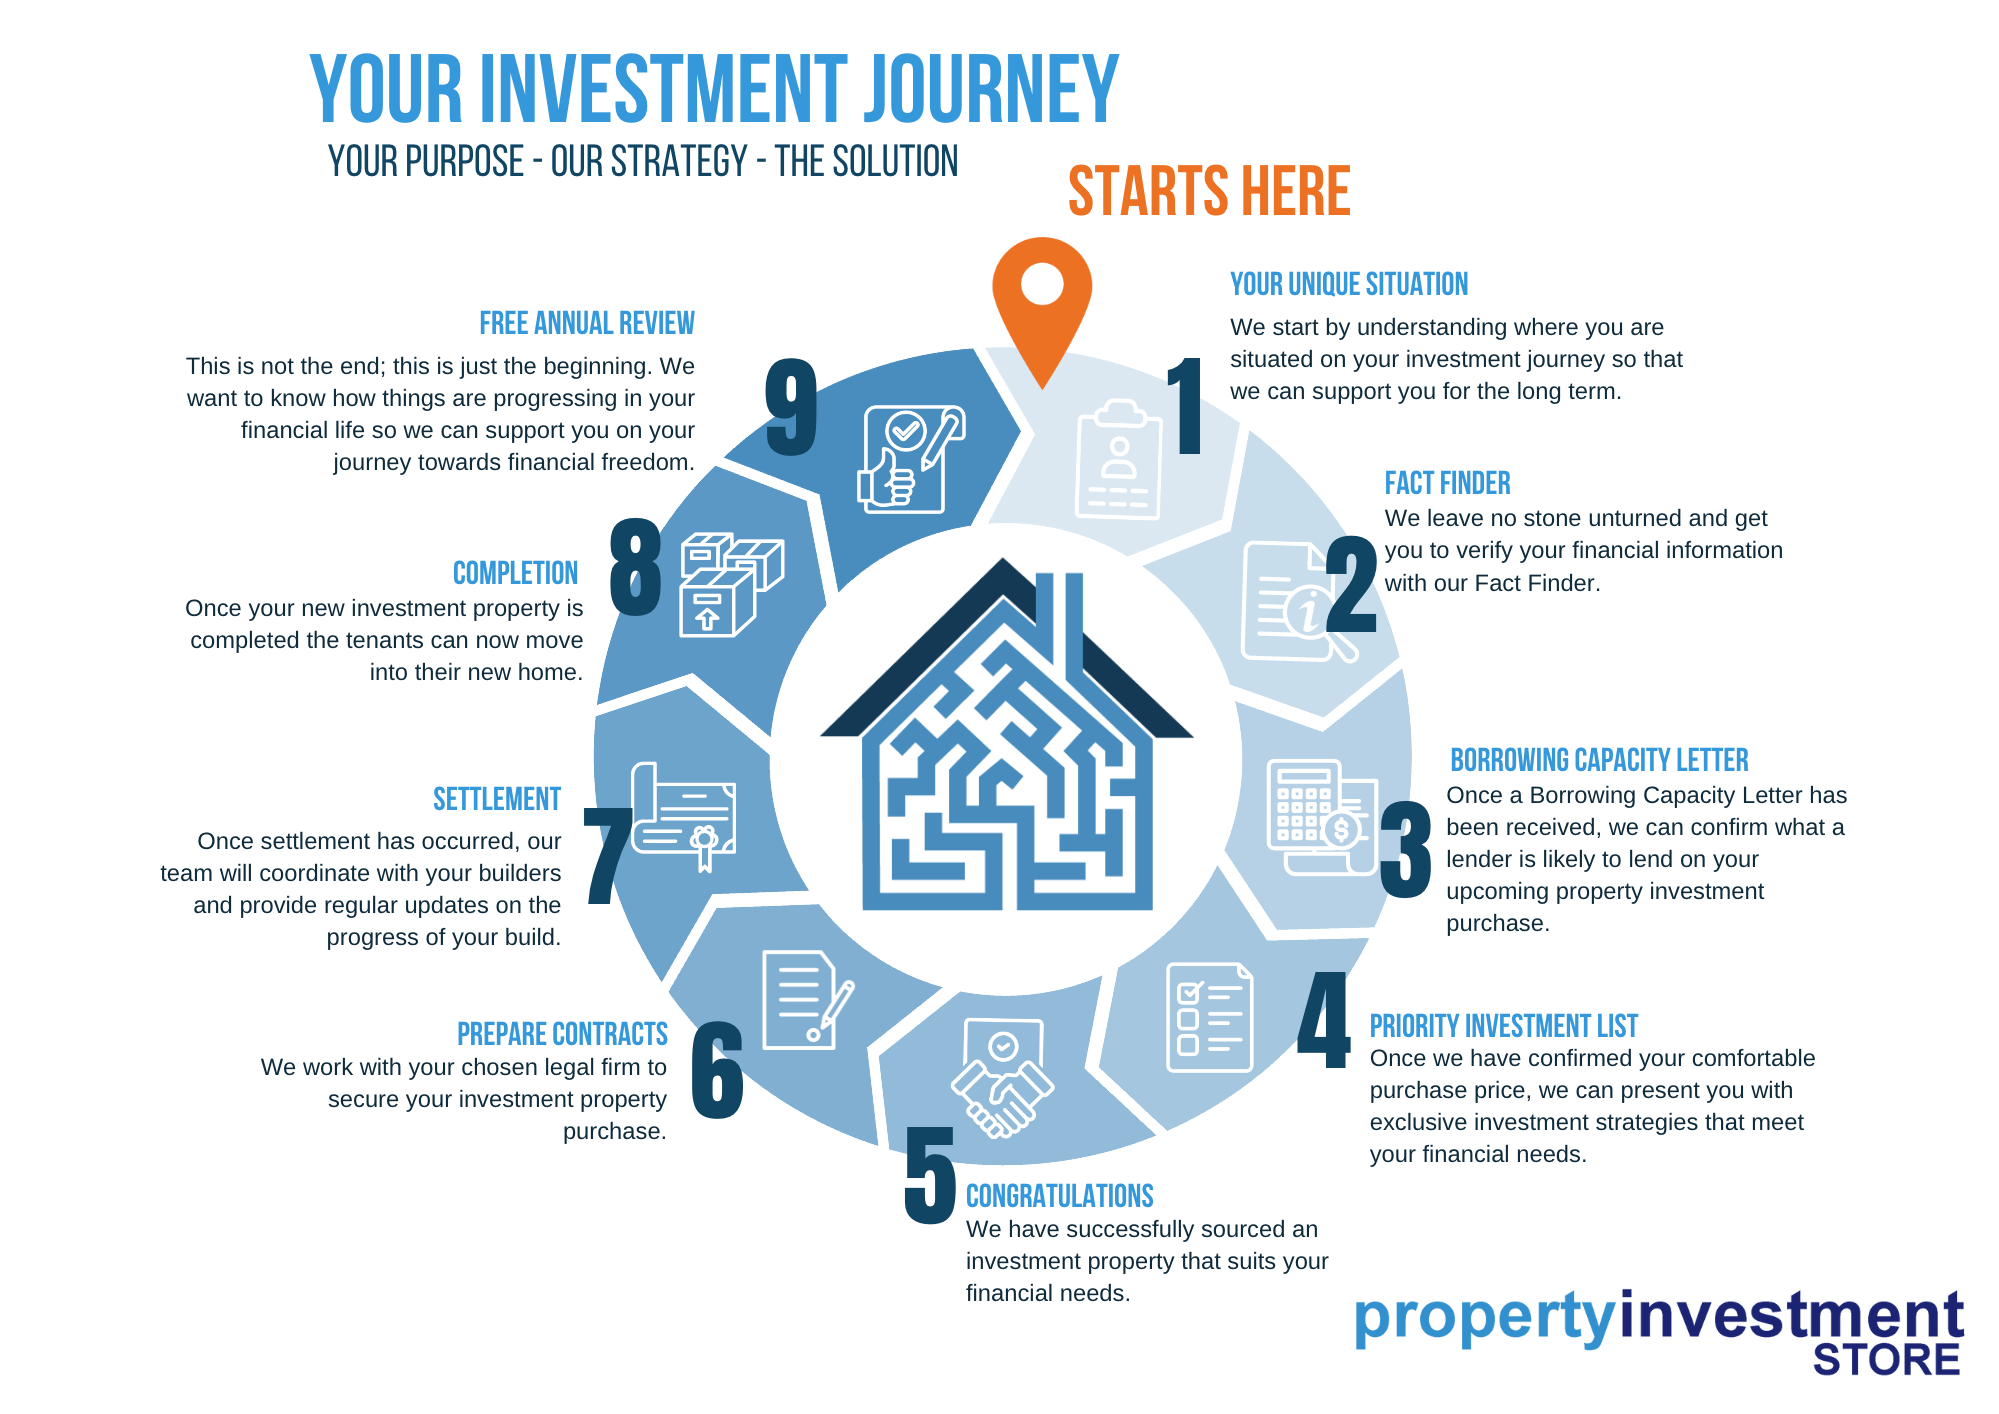 Property Investment Store Customer Journey